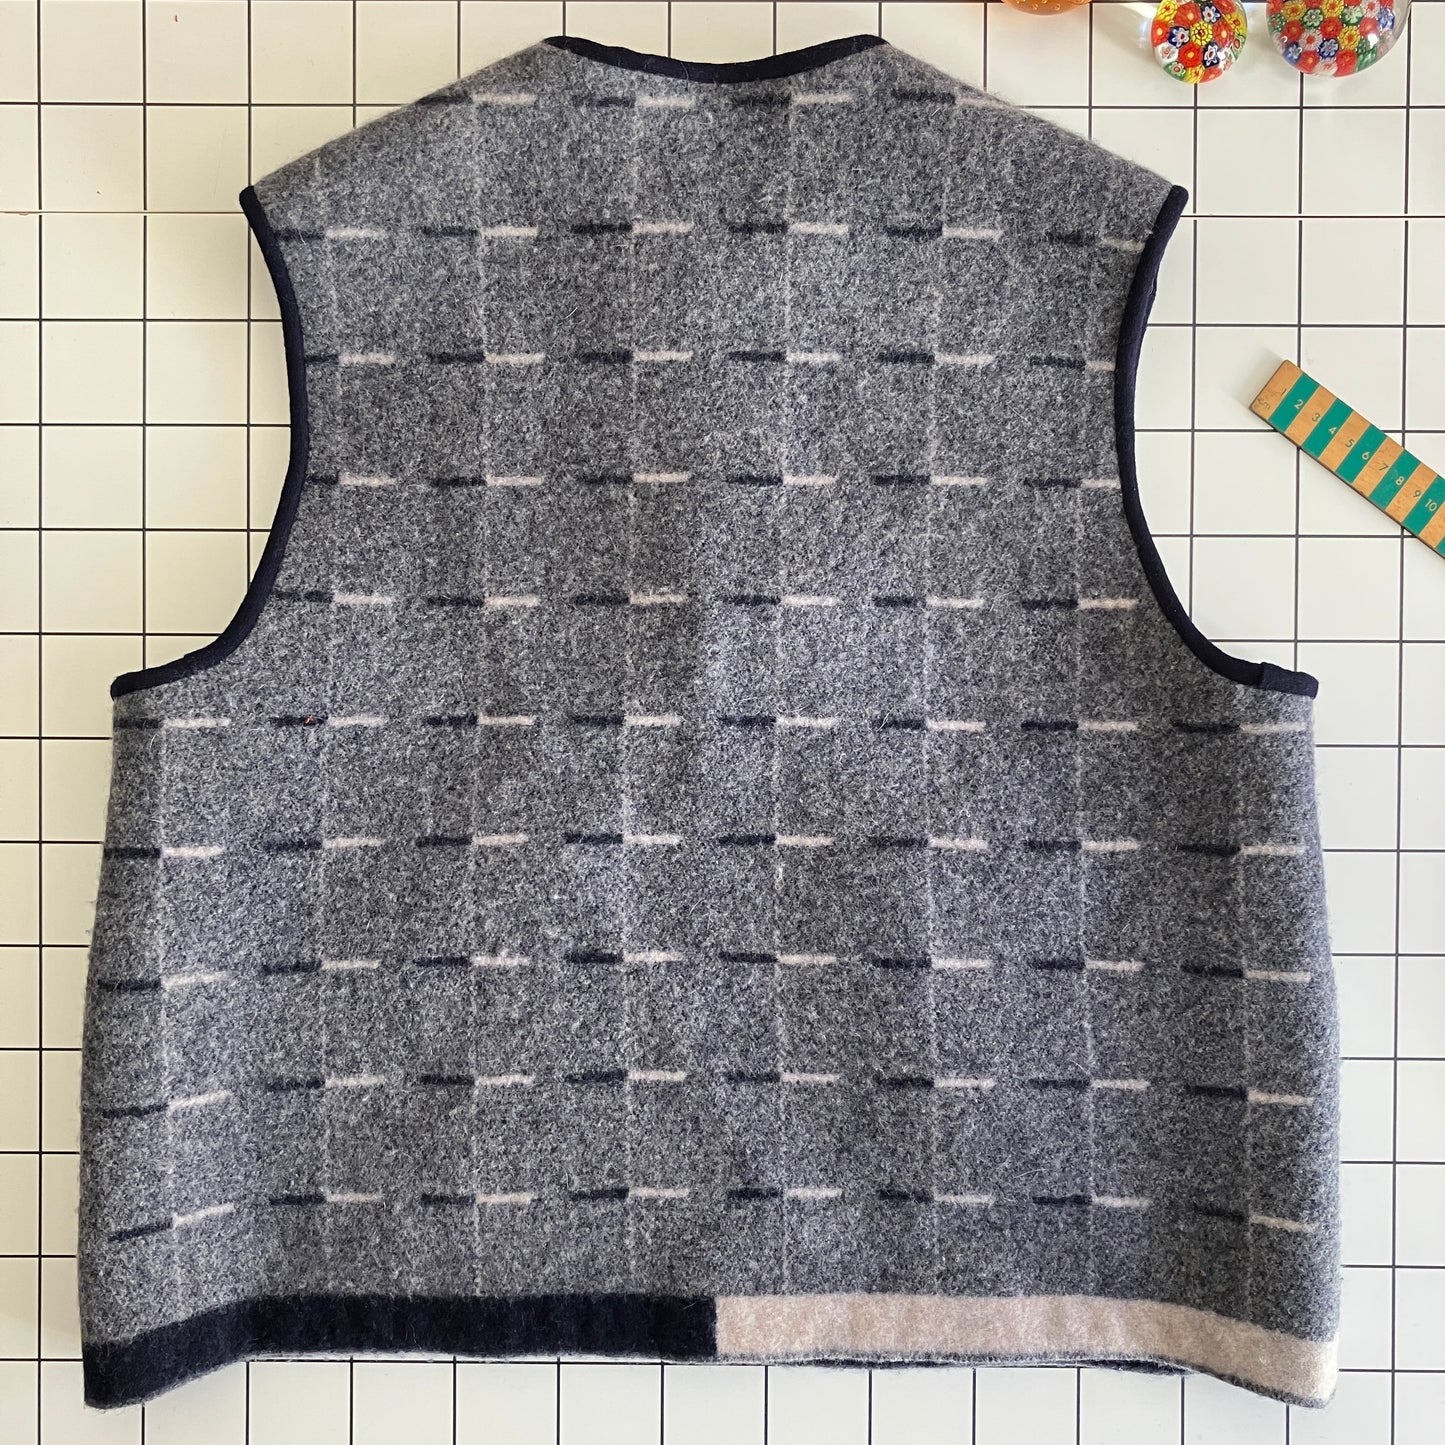 Cosy vest made from a reclaimed grey and blue lambswool blanket with two tie fastenings